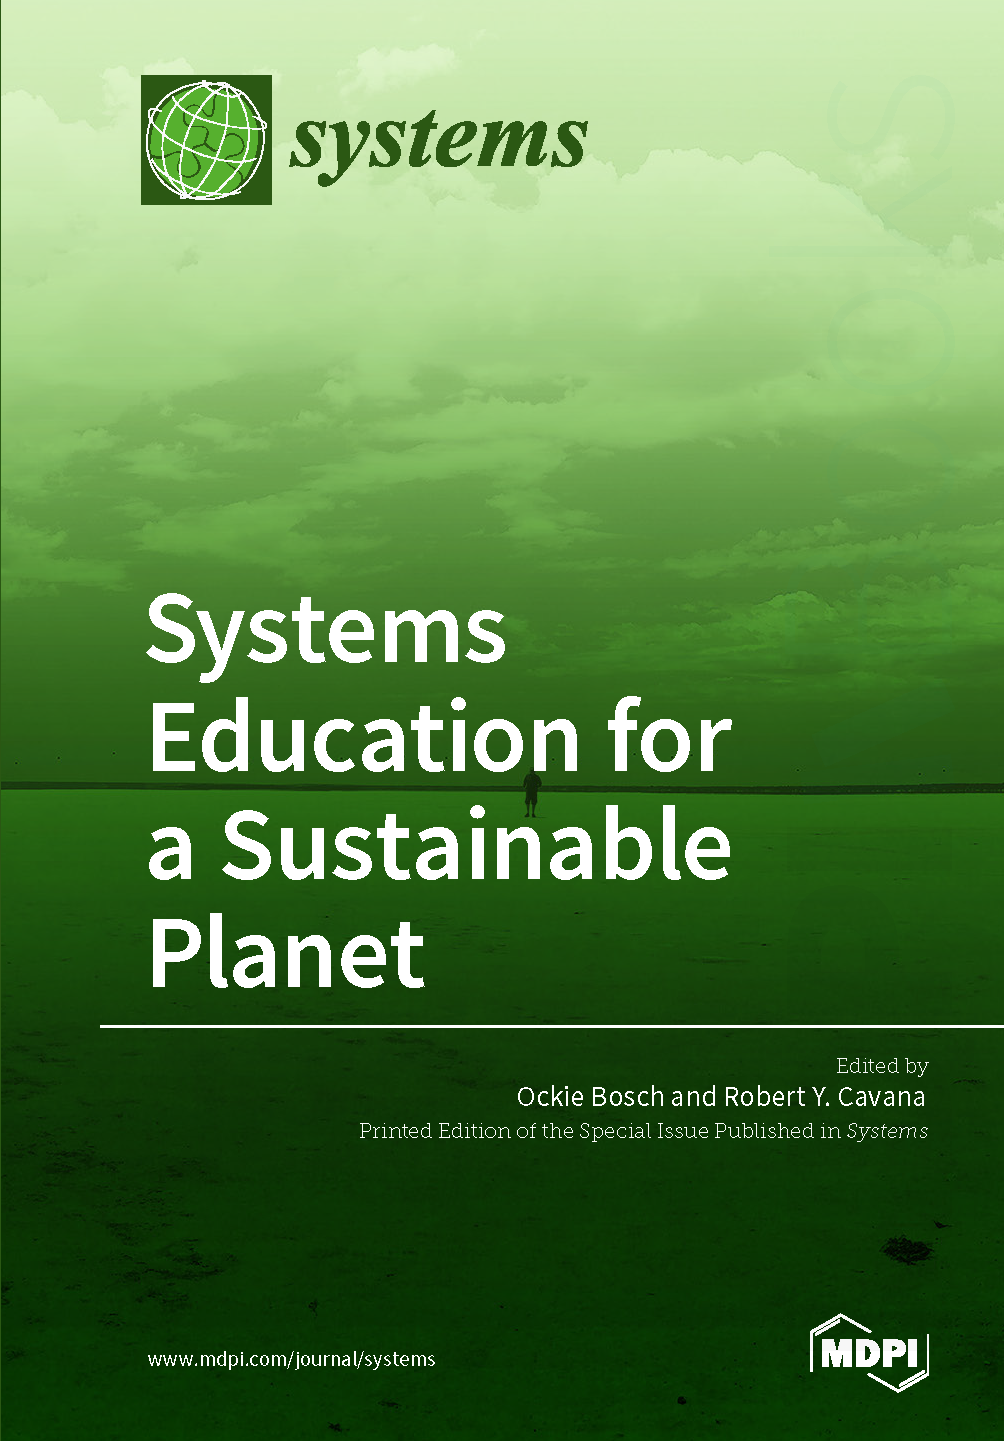 Systems Education for a Sustainable Planet